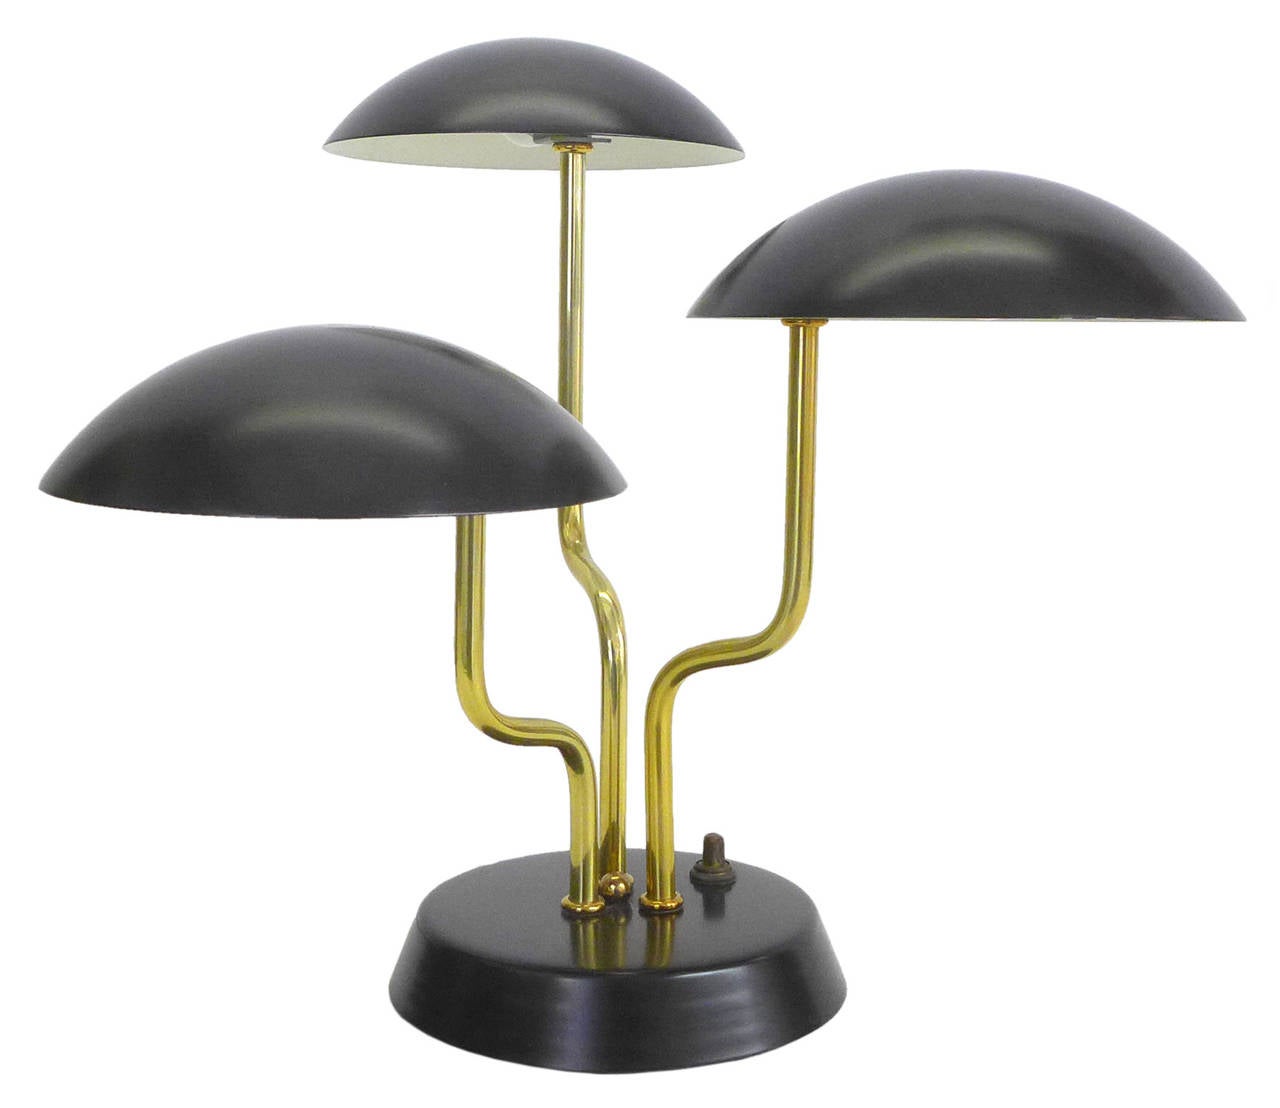 A fantastic and rare example of 1950's Italian lighting designed in 1952 by maestro of Italian lighting-design Gino Sarfatti and distributed in the USA by Knoll.  In spectacular original condition, appearing to have been barely used. The enameled